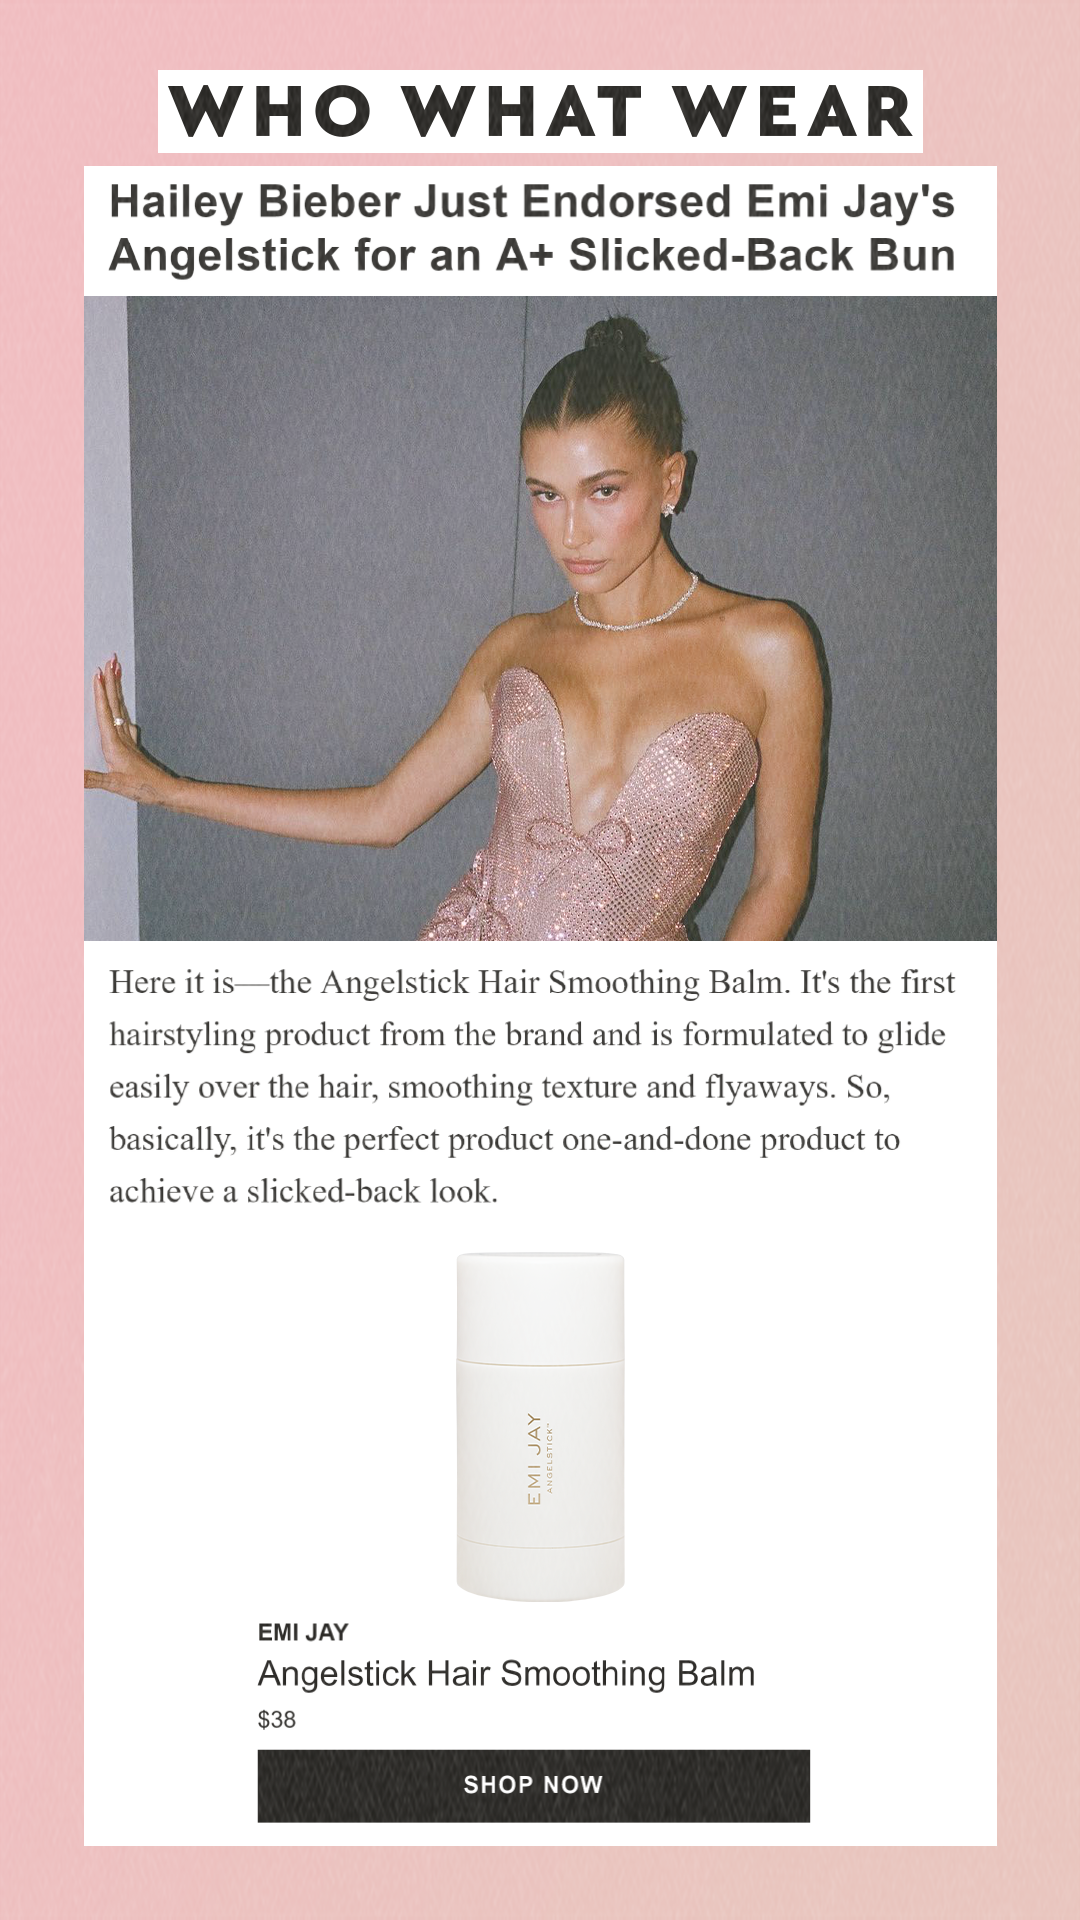 Hailey Bieber Just Endorsed Emi Jay's Angelstick for an A+ Slicked-Back Bun Here it is—the Angelstick Hair Smoothing Balm. It's the first hairstyling product from the brand and is formulated to glide easily over the hair, smoothing texture and flyaways. So, basically, it's the perfect product one-and-done product to achieve a slicked-back look. Emi JayAngelstick Hair Smoothing Balm$38Shop Now